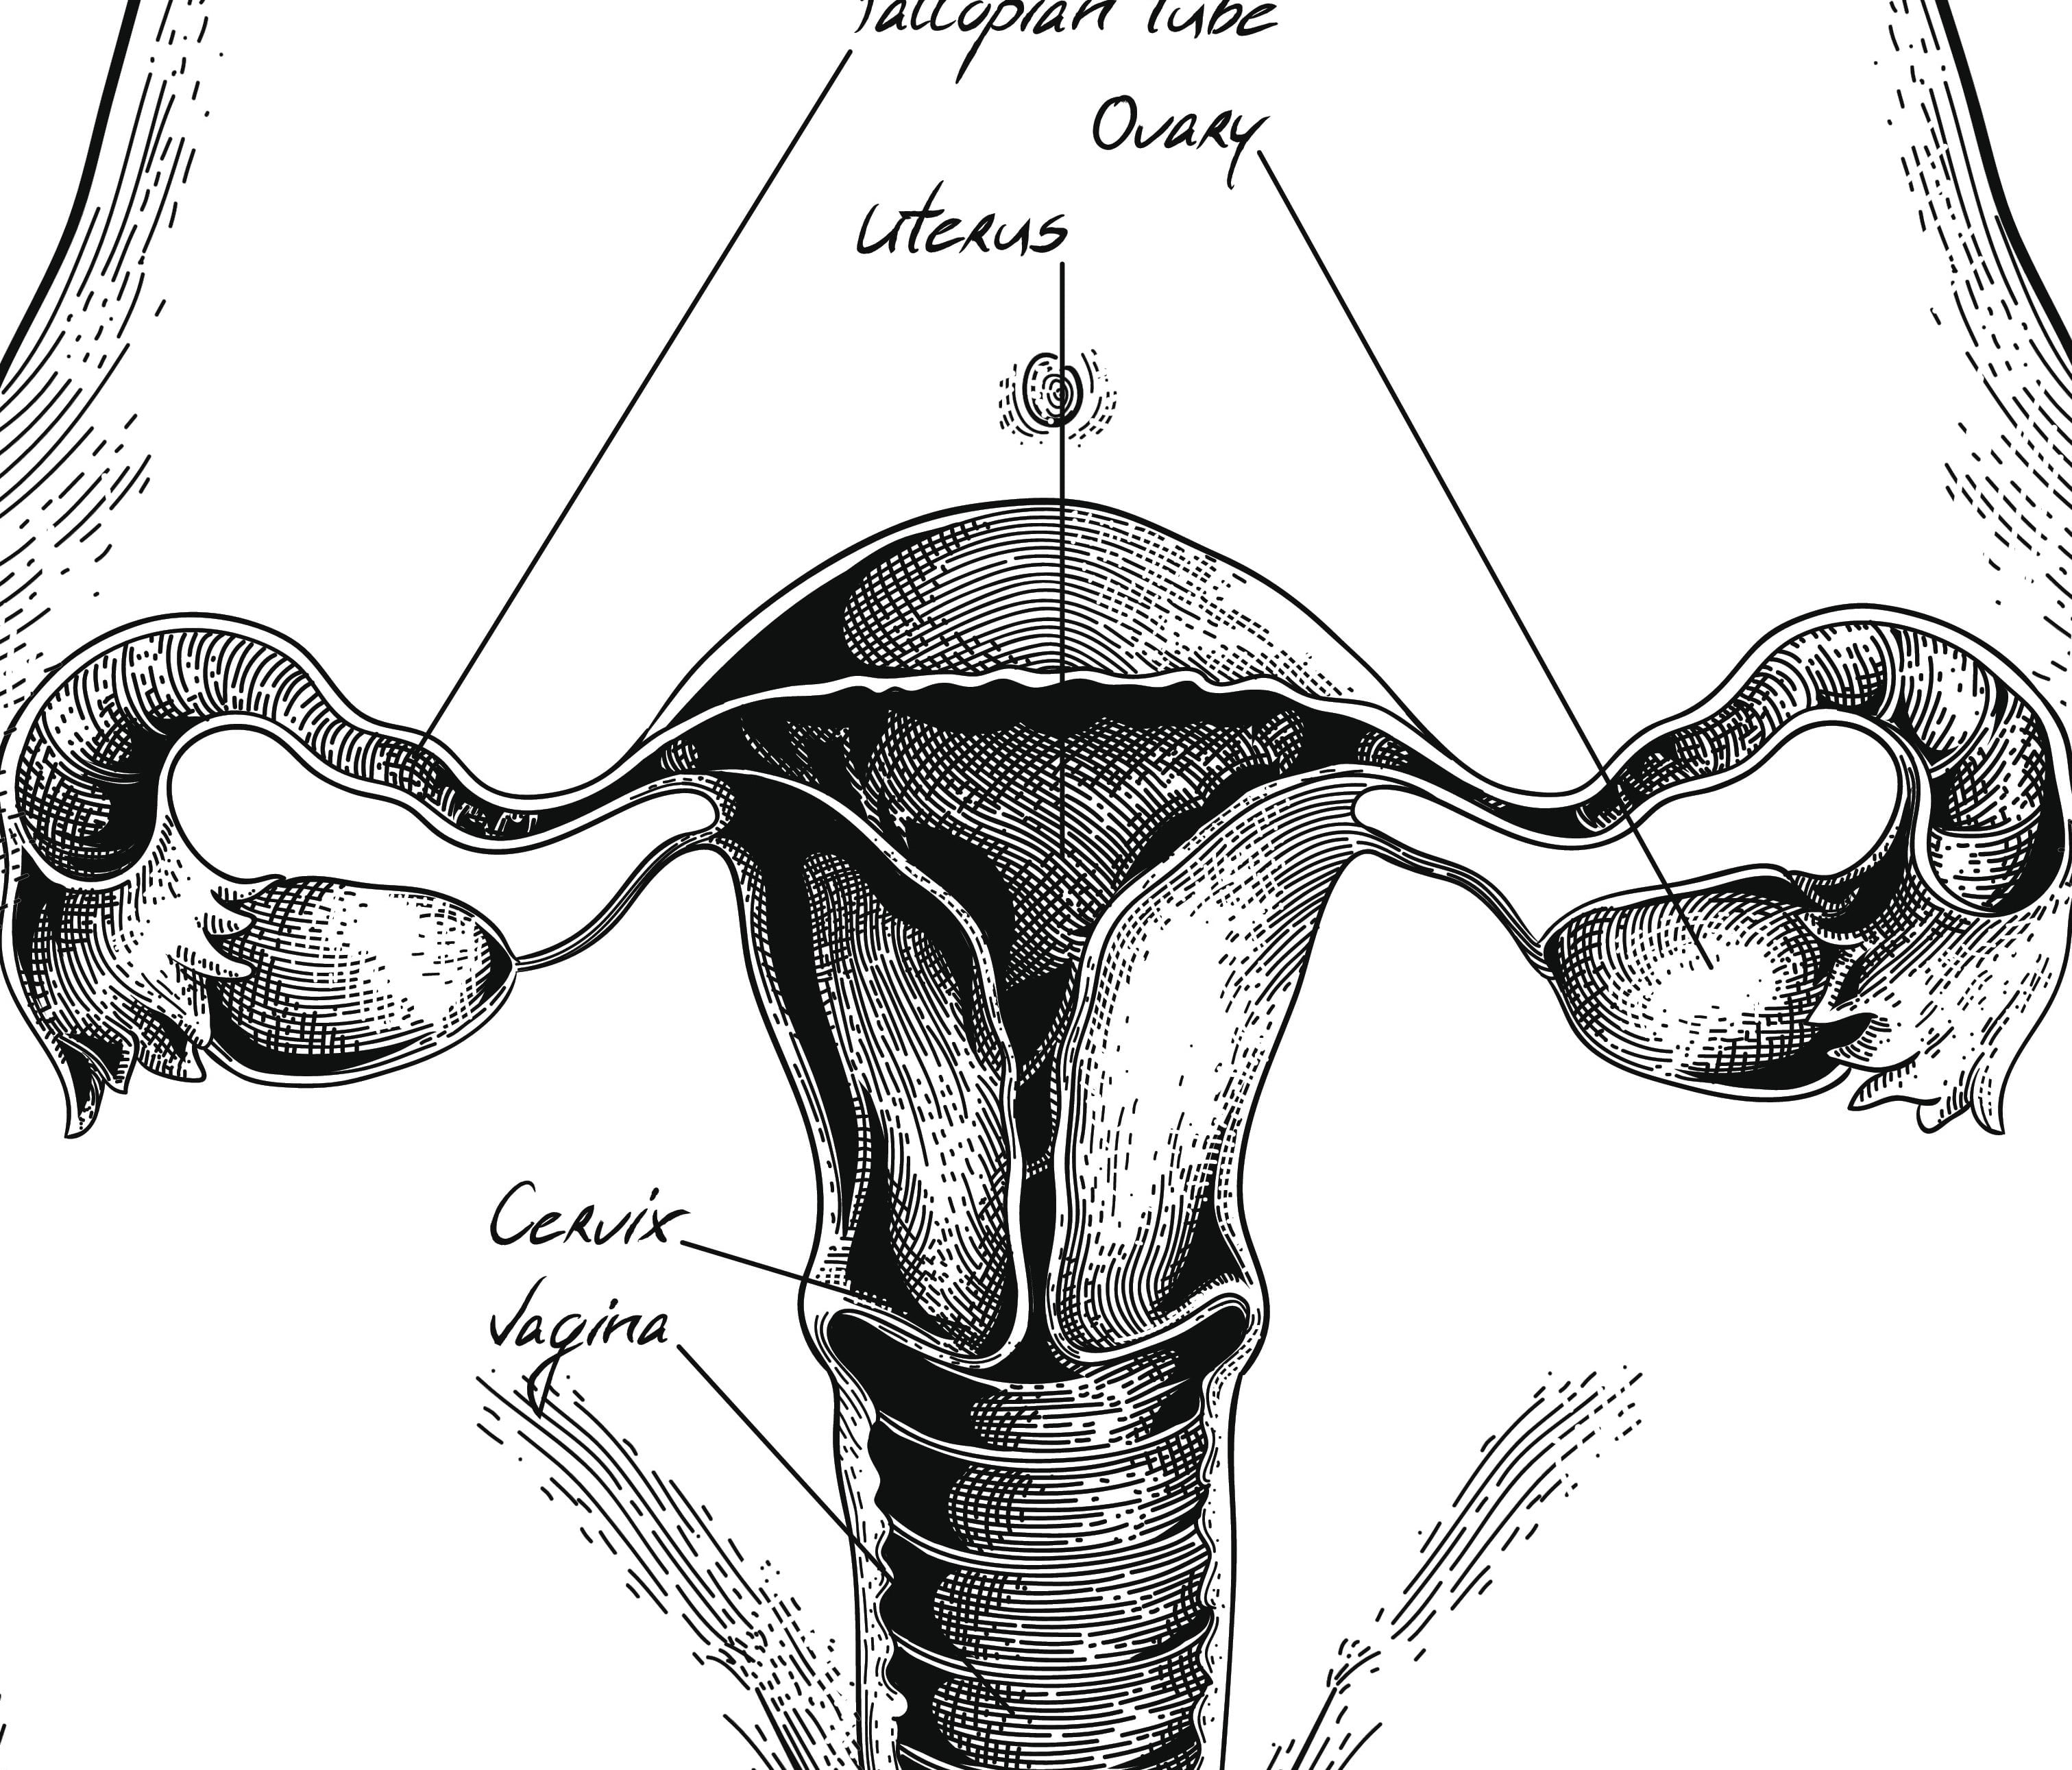 Vaginal Atrophy and Sexual Function